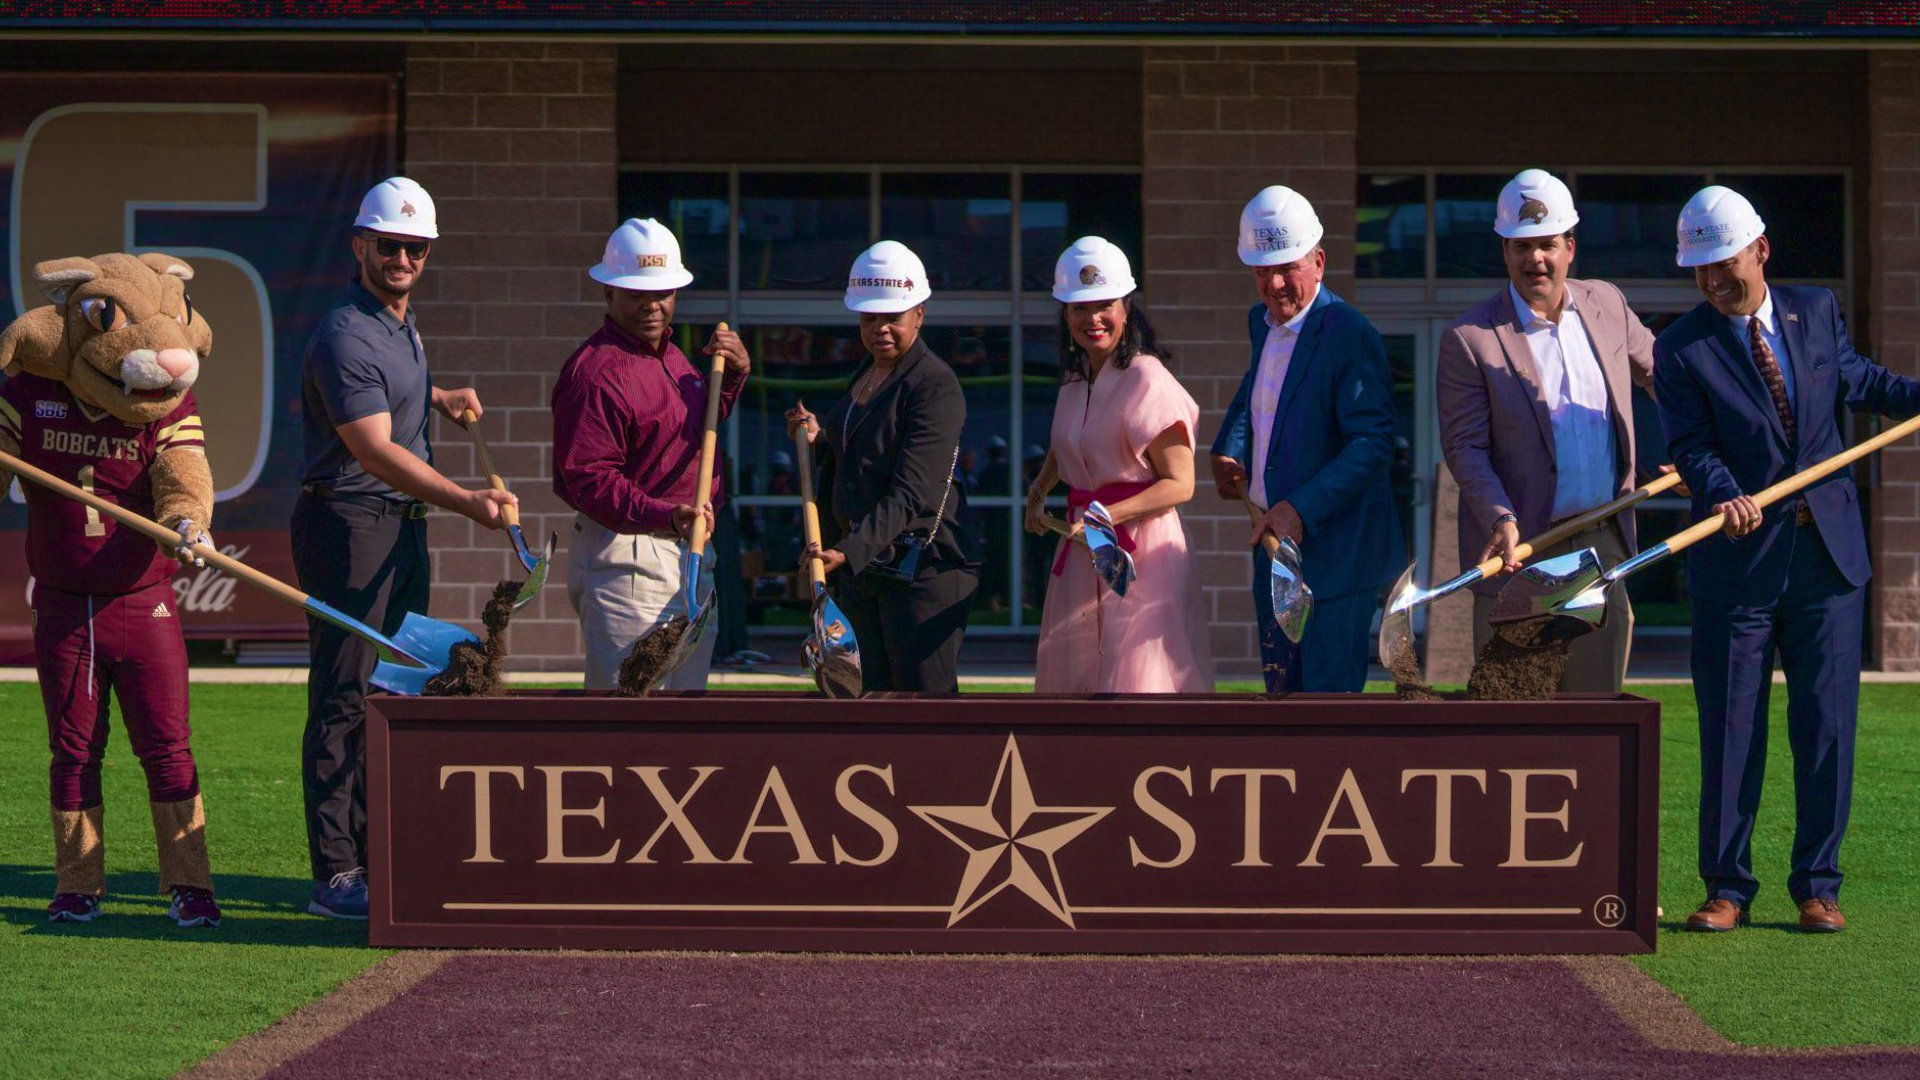 President Damphousse, Boko, and other TXST community members participate in a groundbreaking ceremony while holding shovels.